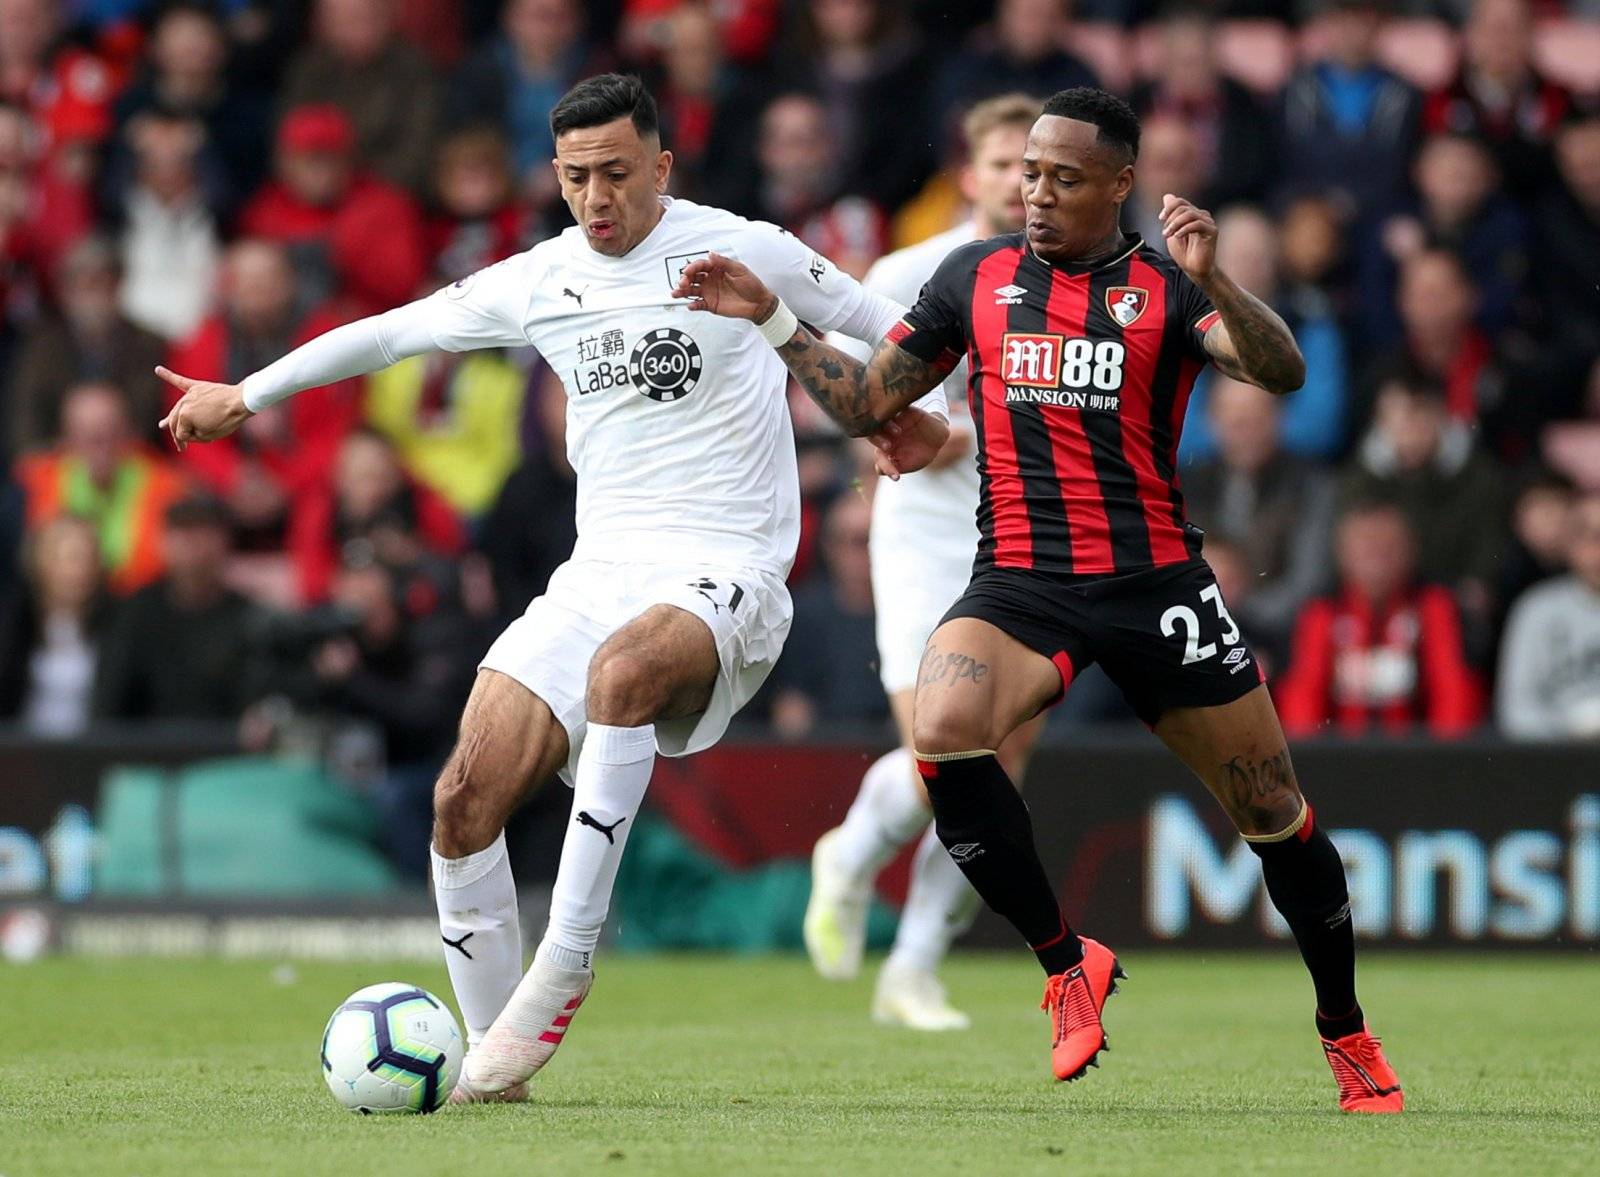 West Ham want to sign Nathaniel Clyne this summer - Premier League